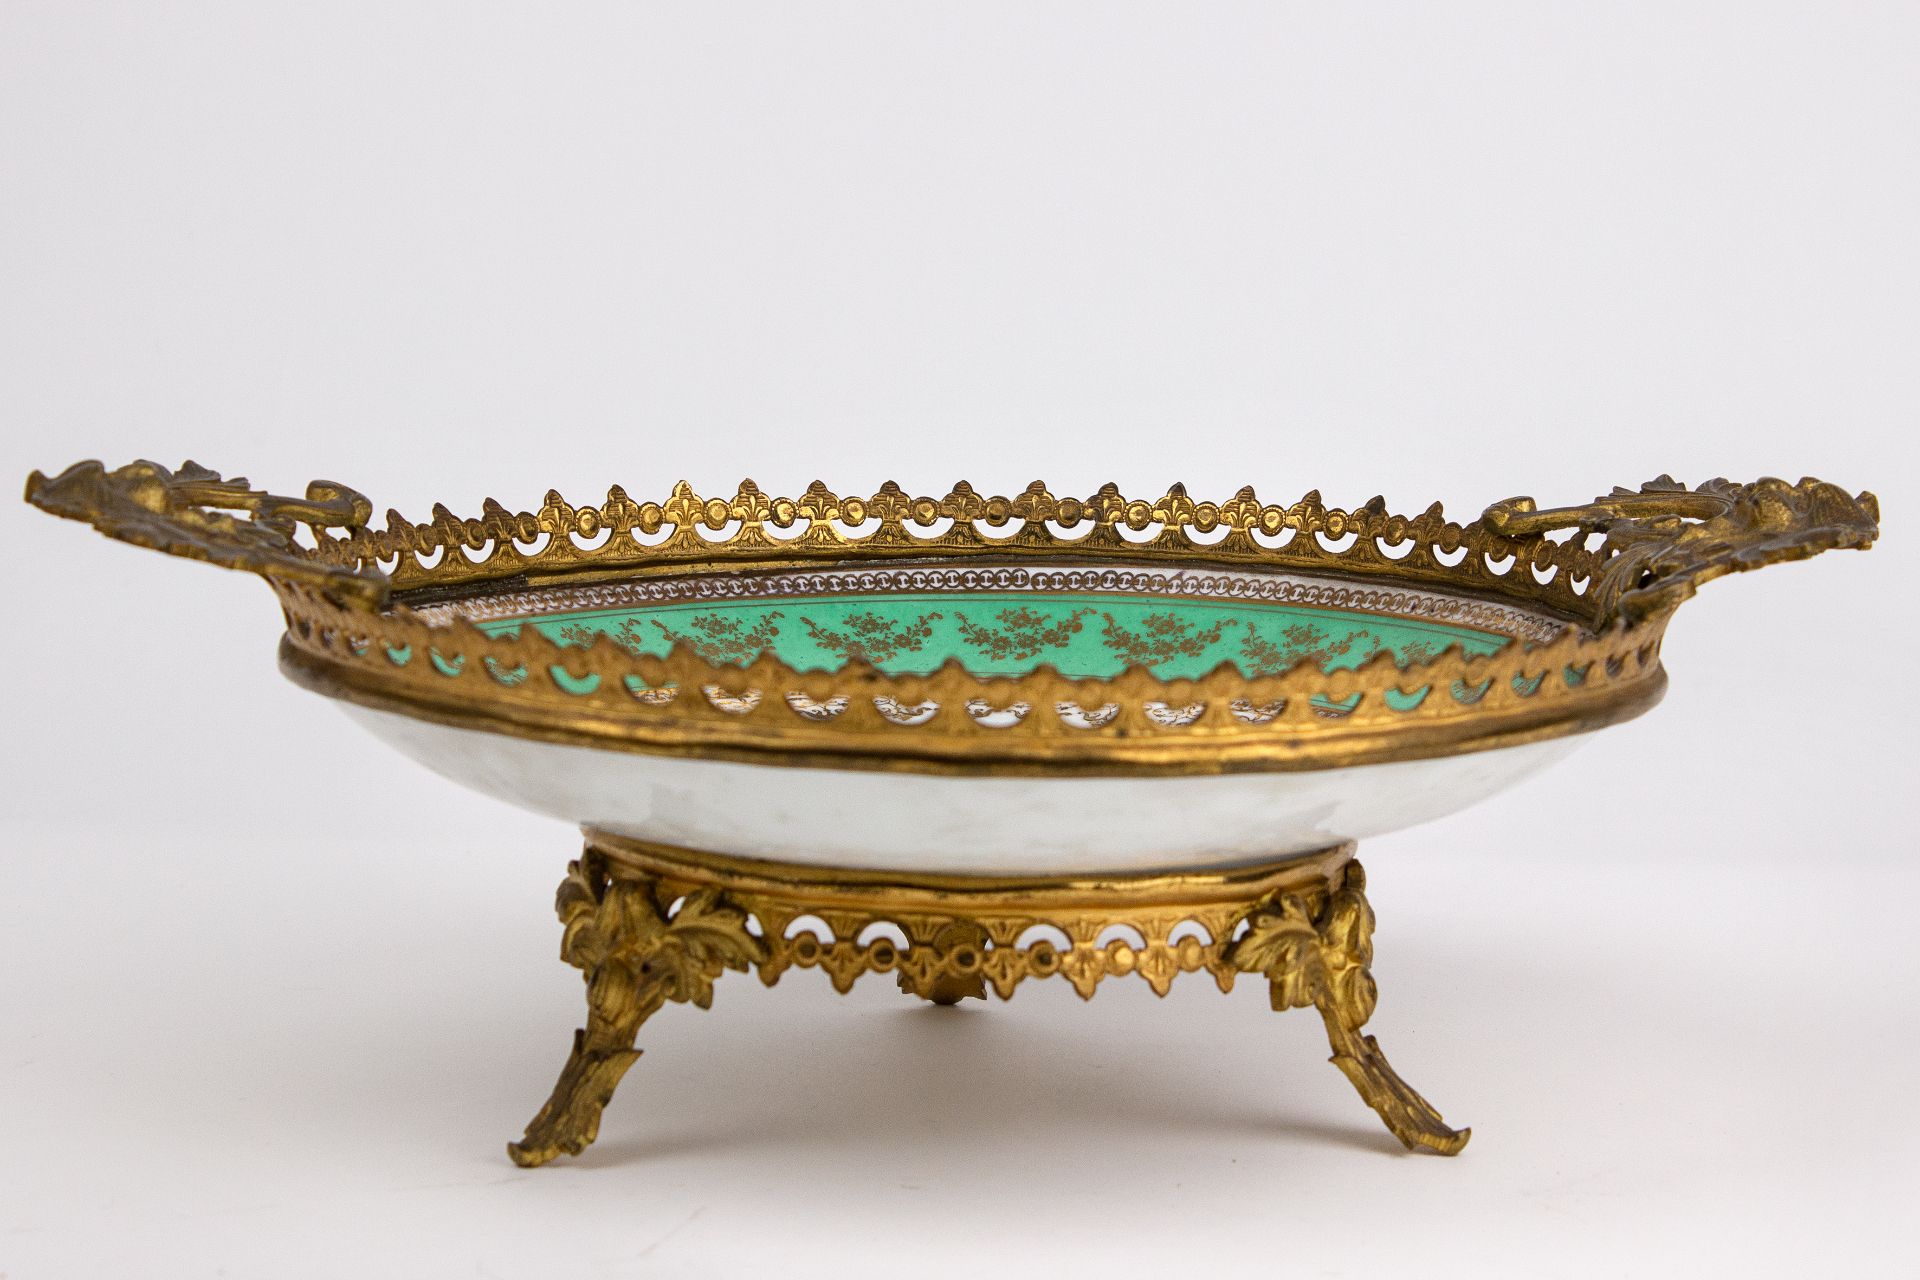 A first half of 20th century French centrepiece in Sévres style porcelain with a bronze garniture